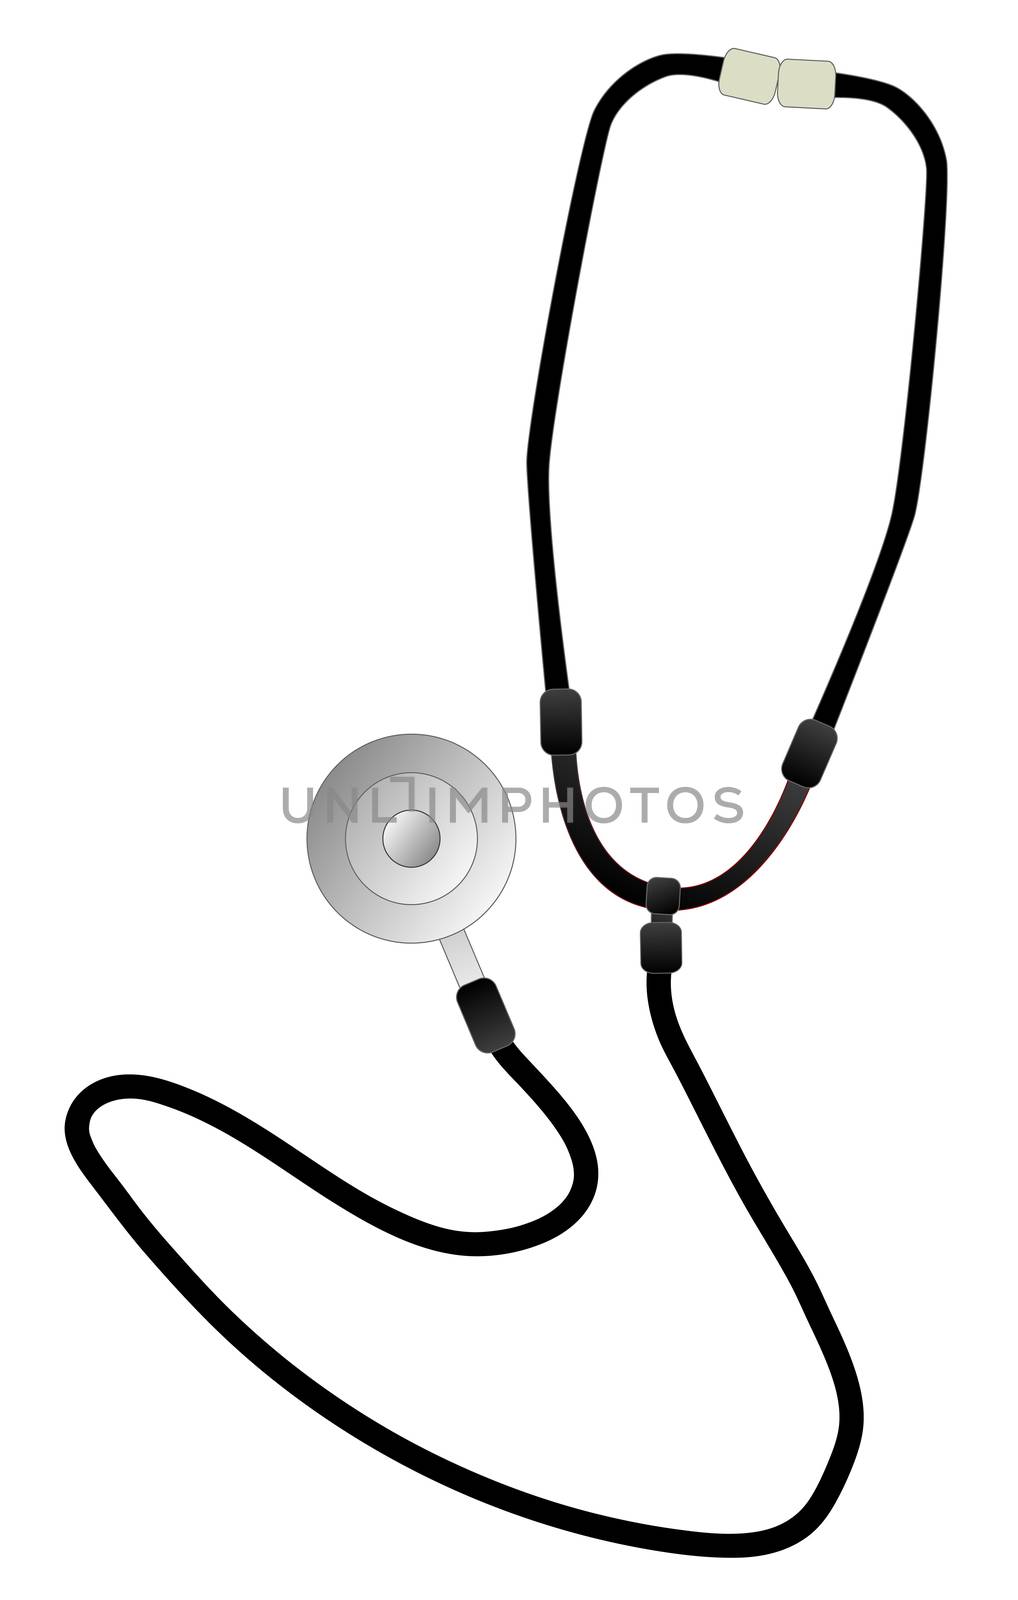 A hospital doctors stethoscope isolated on a white background